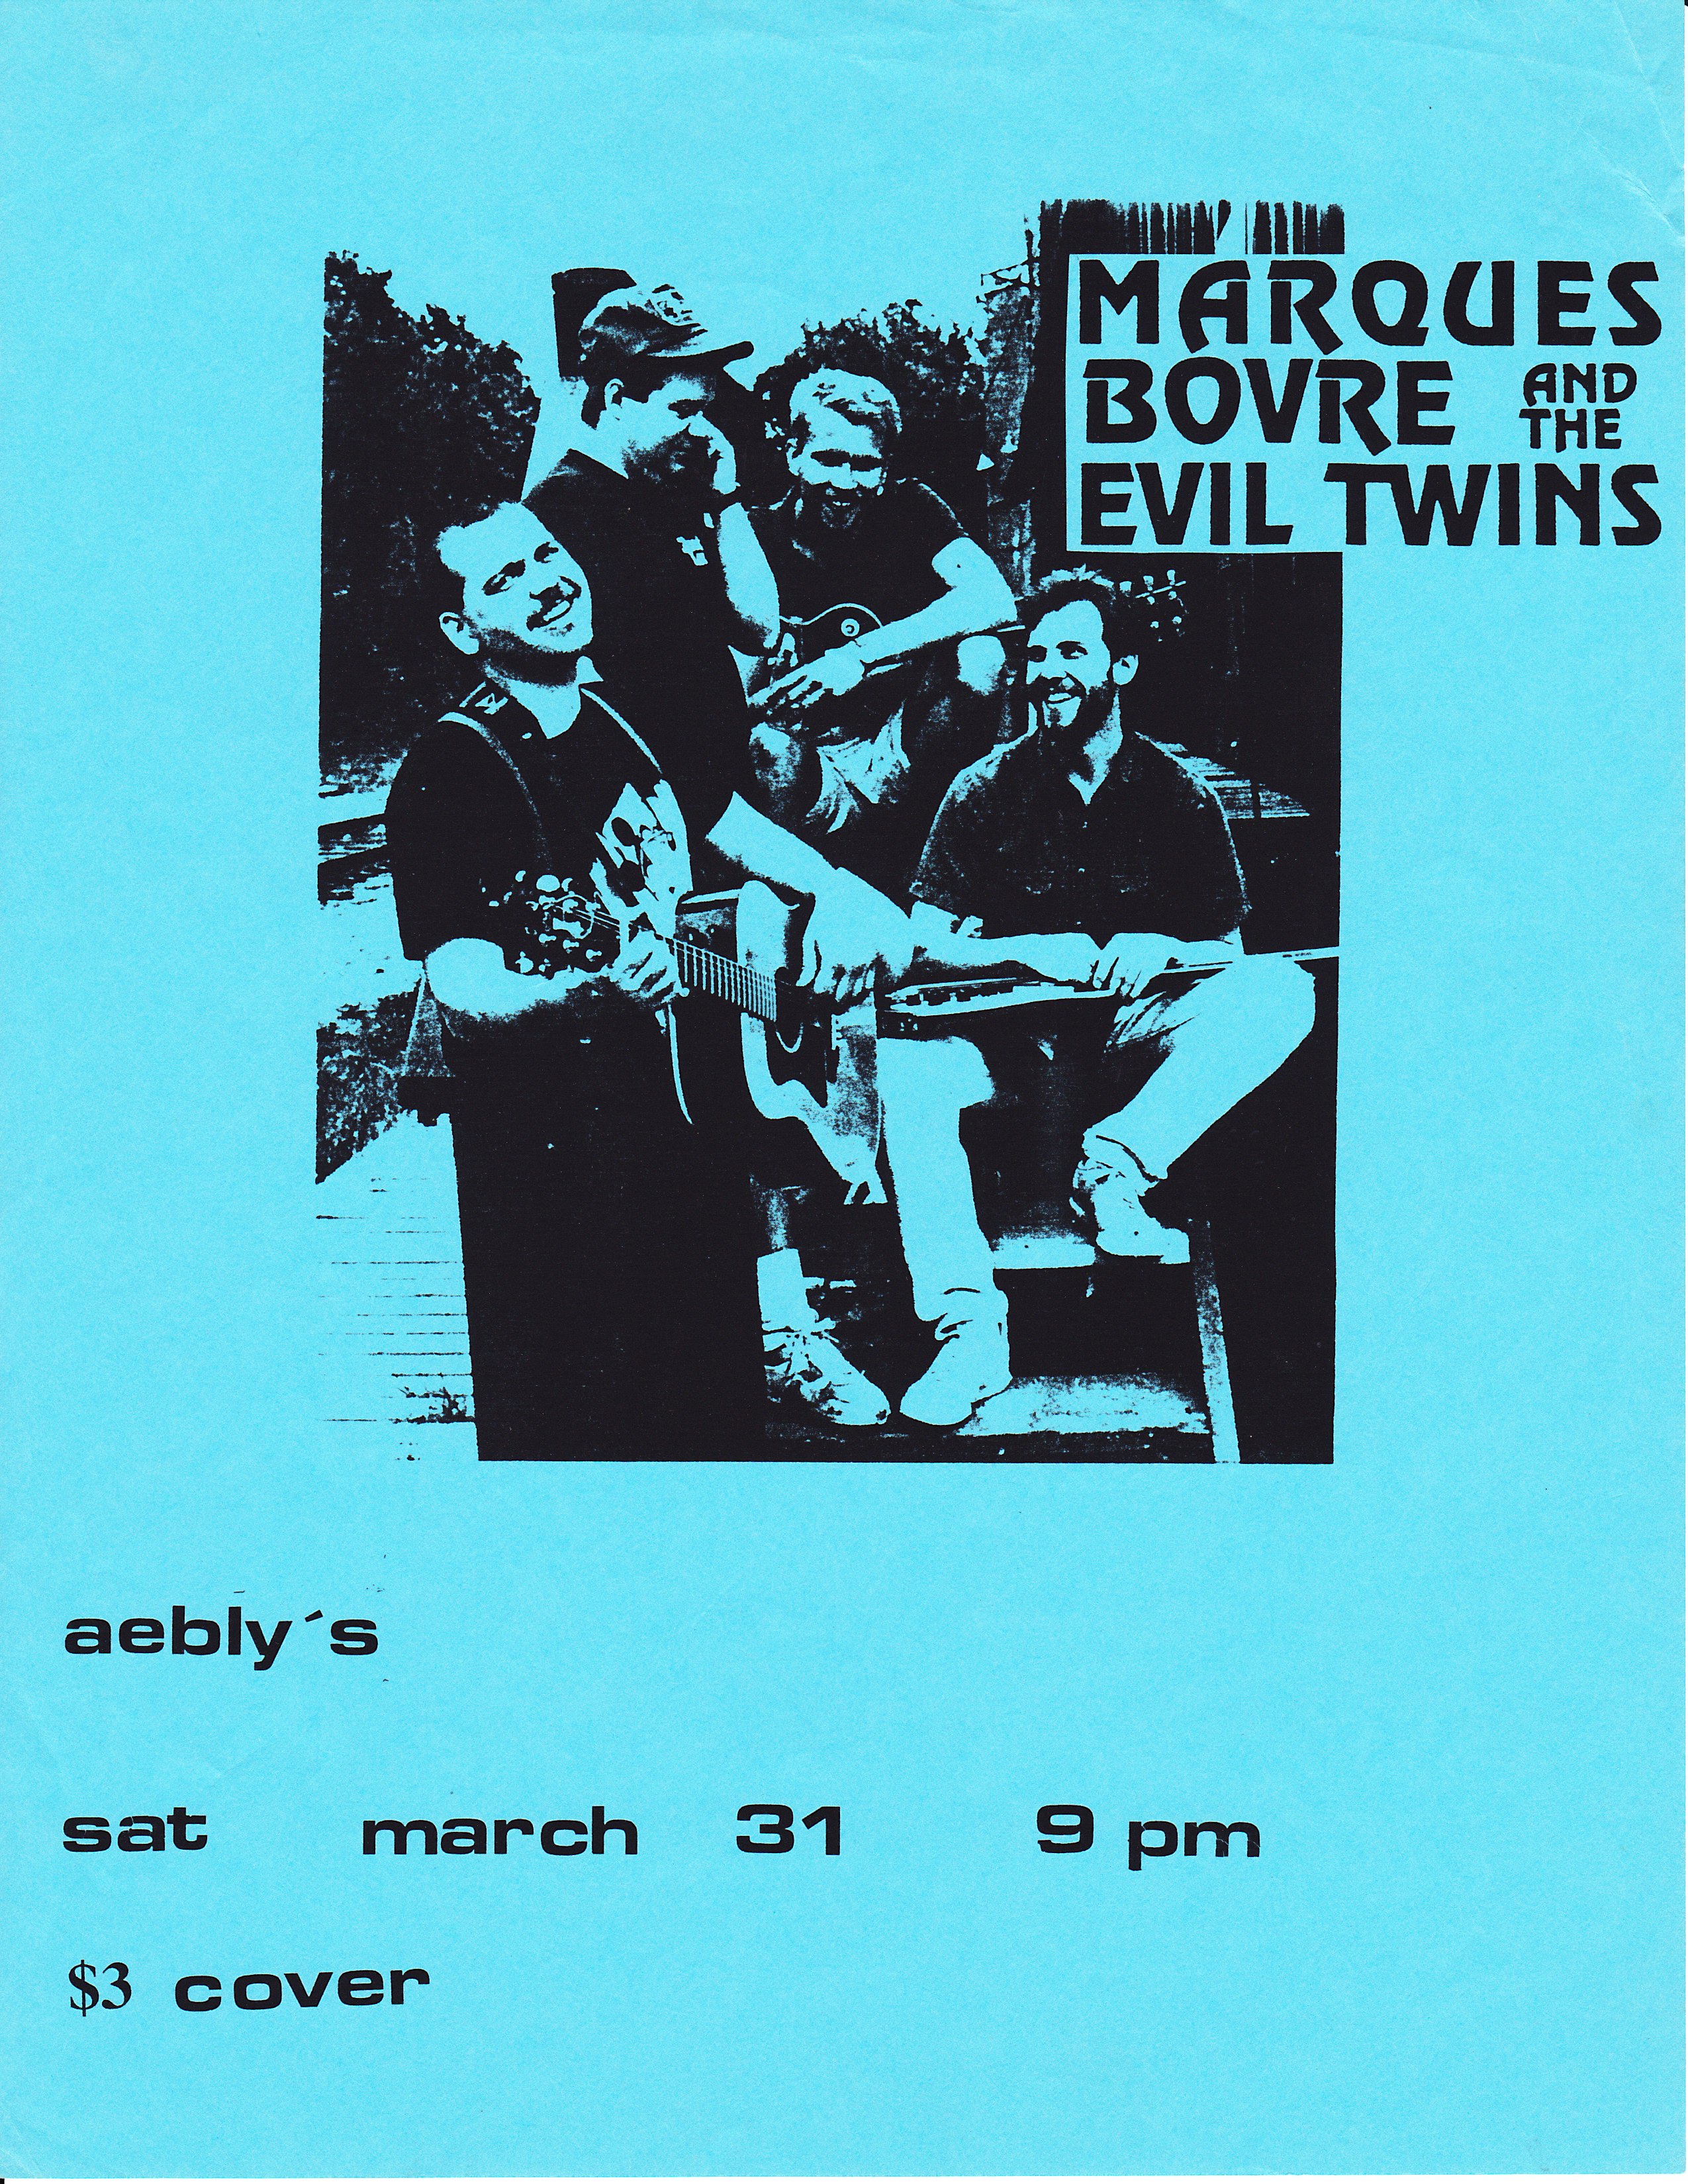 Marques Bovre and the Evil Twins, March 31, 1990